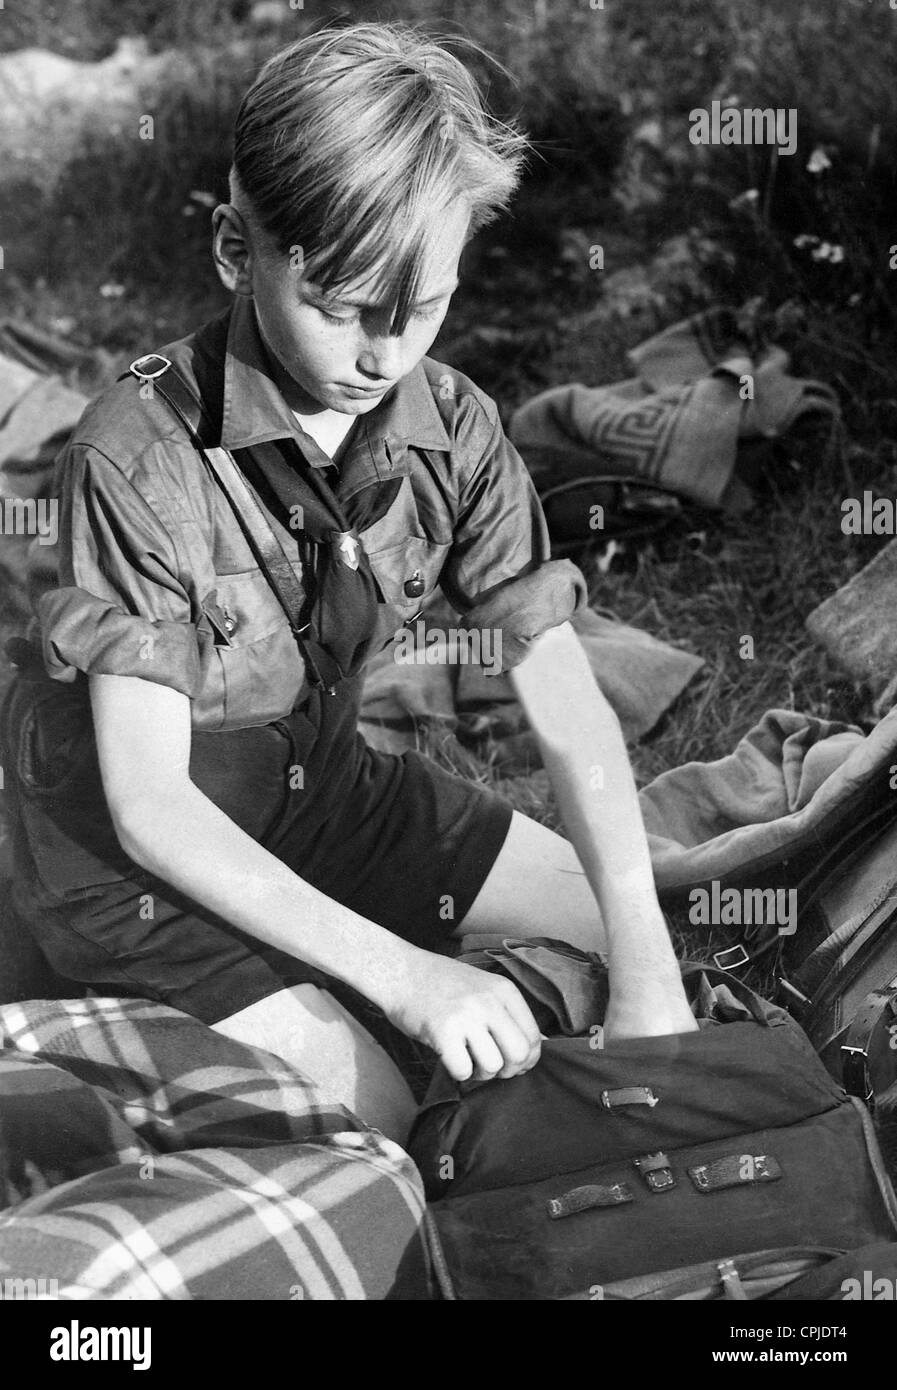 Pimpf of the German Jungvolks (young people) packs his kit bag, 1935 Stock Photo